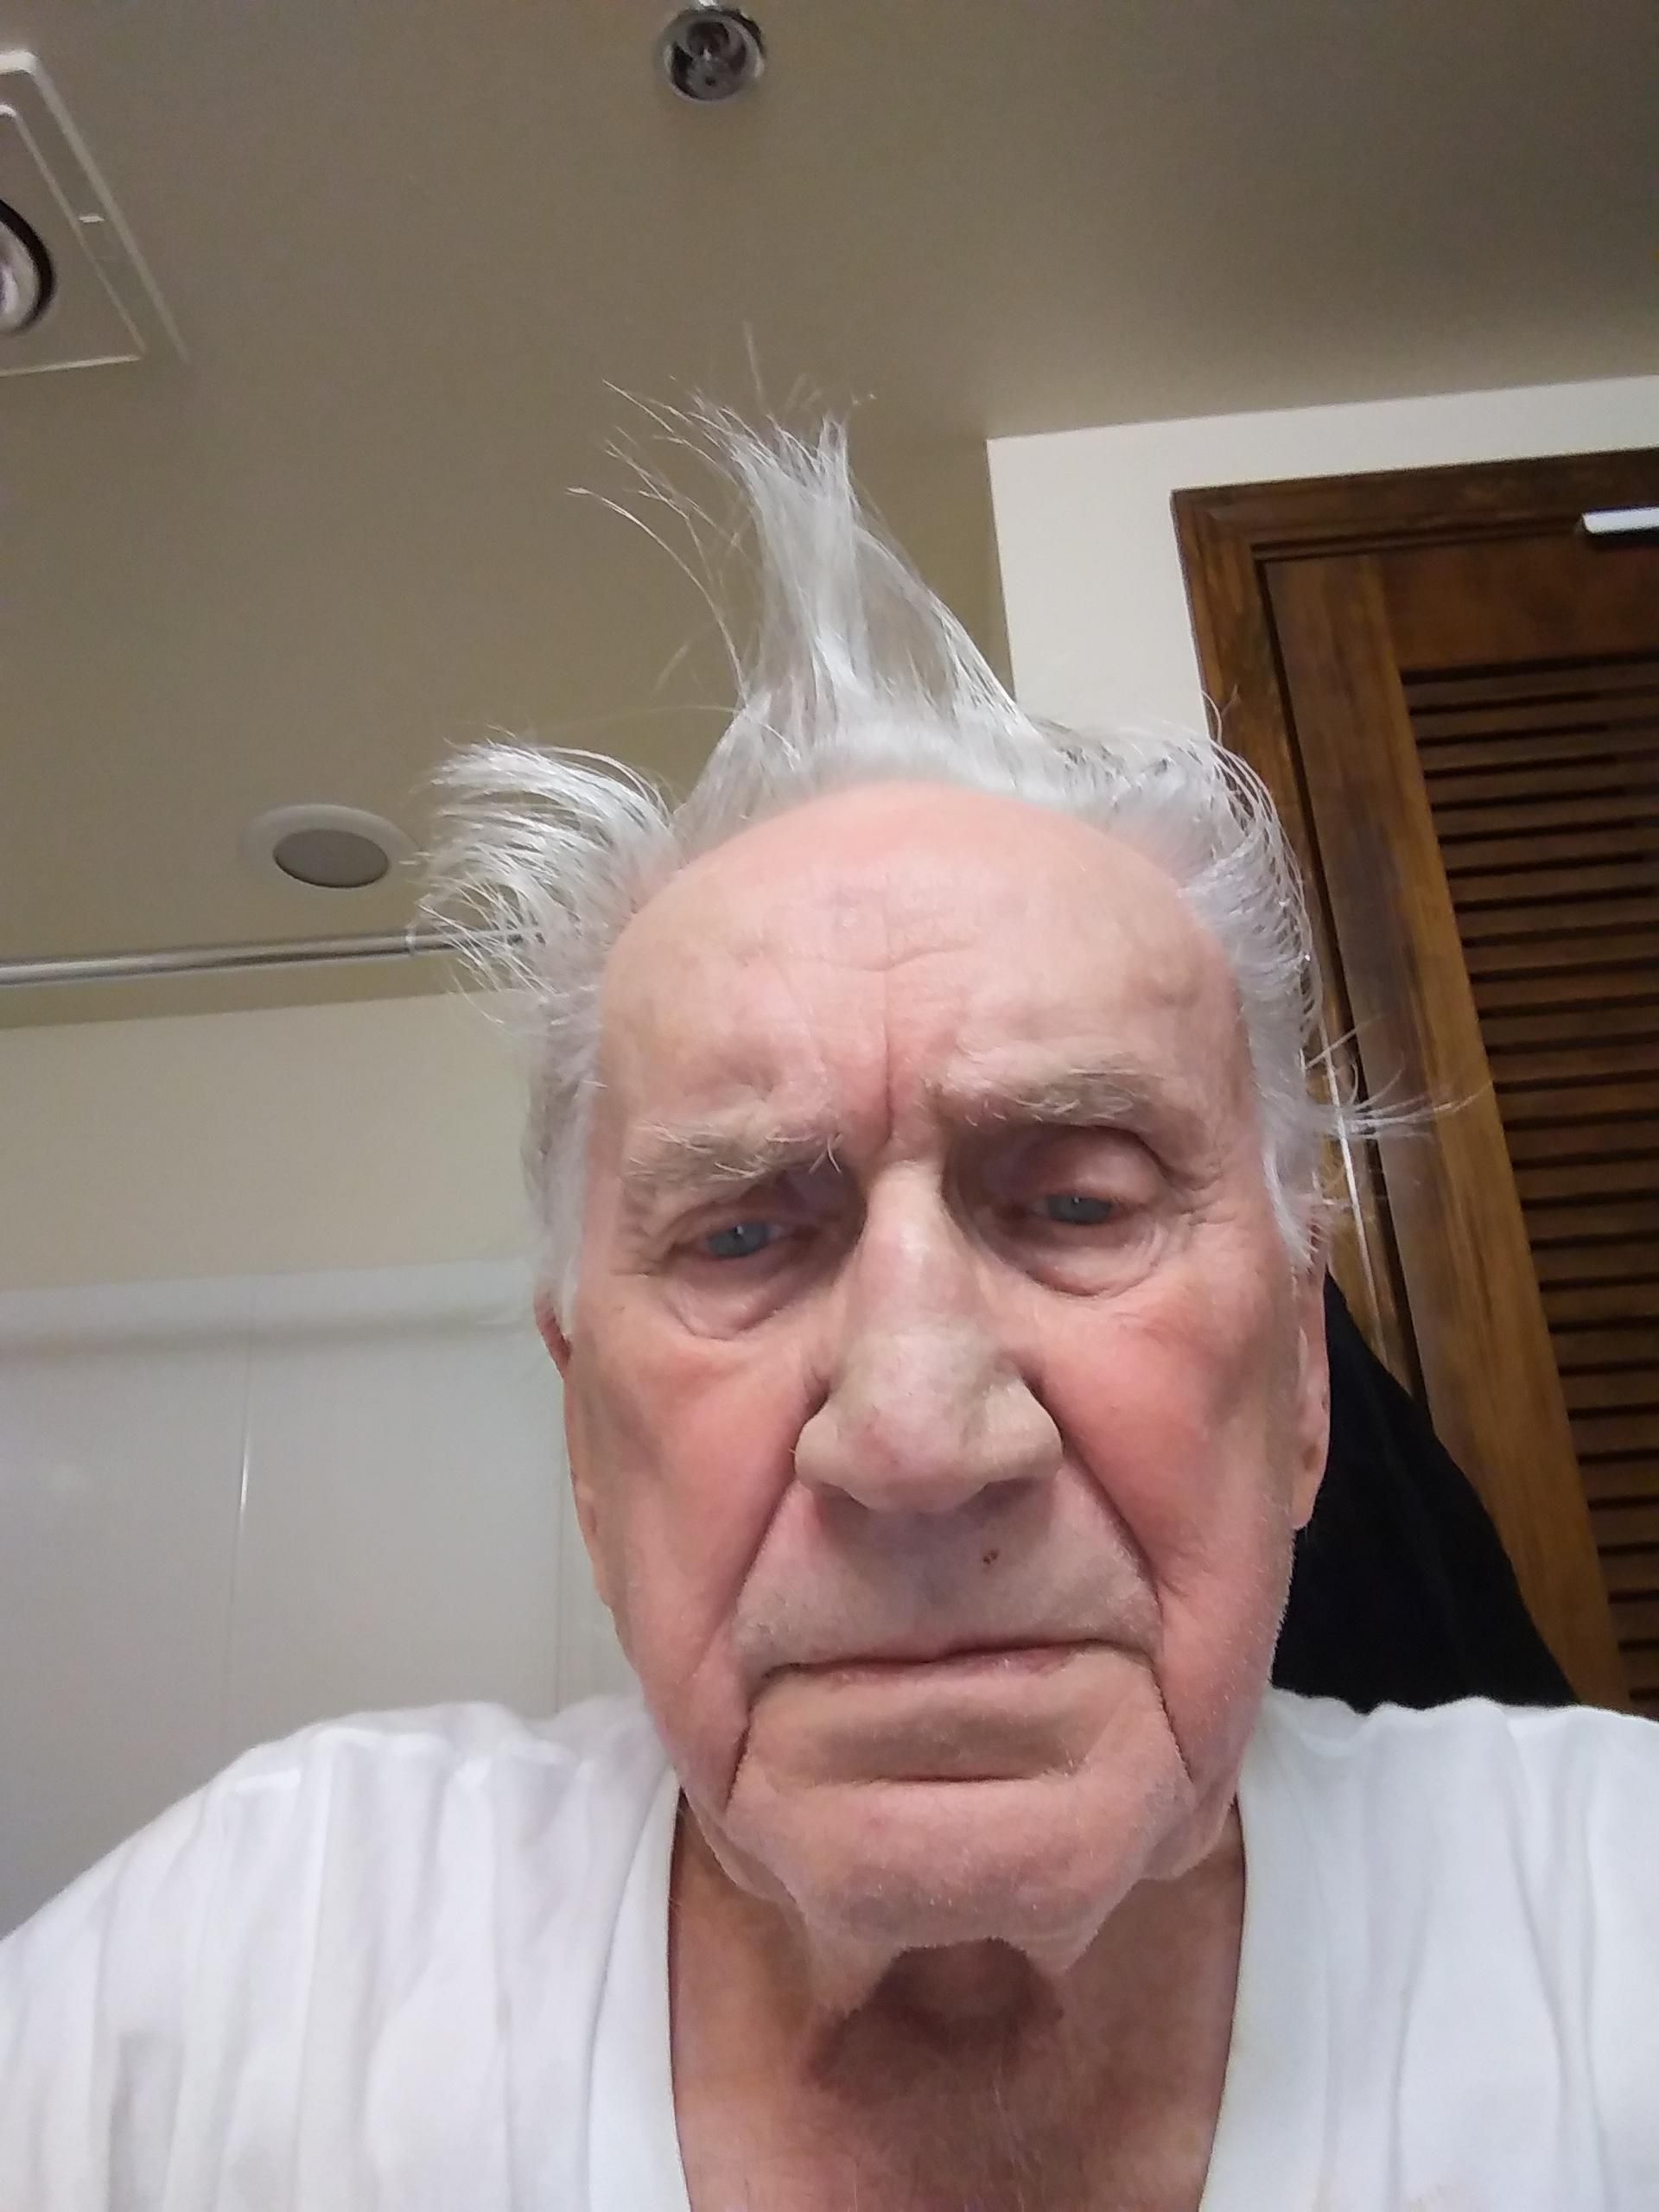 My 92-year-old father-in-law took his first selfie on his iPad and emailed it to us five times.